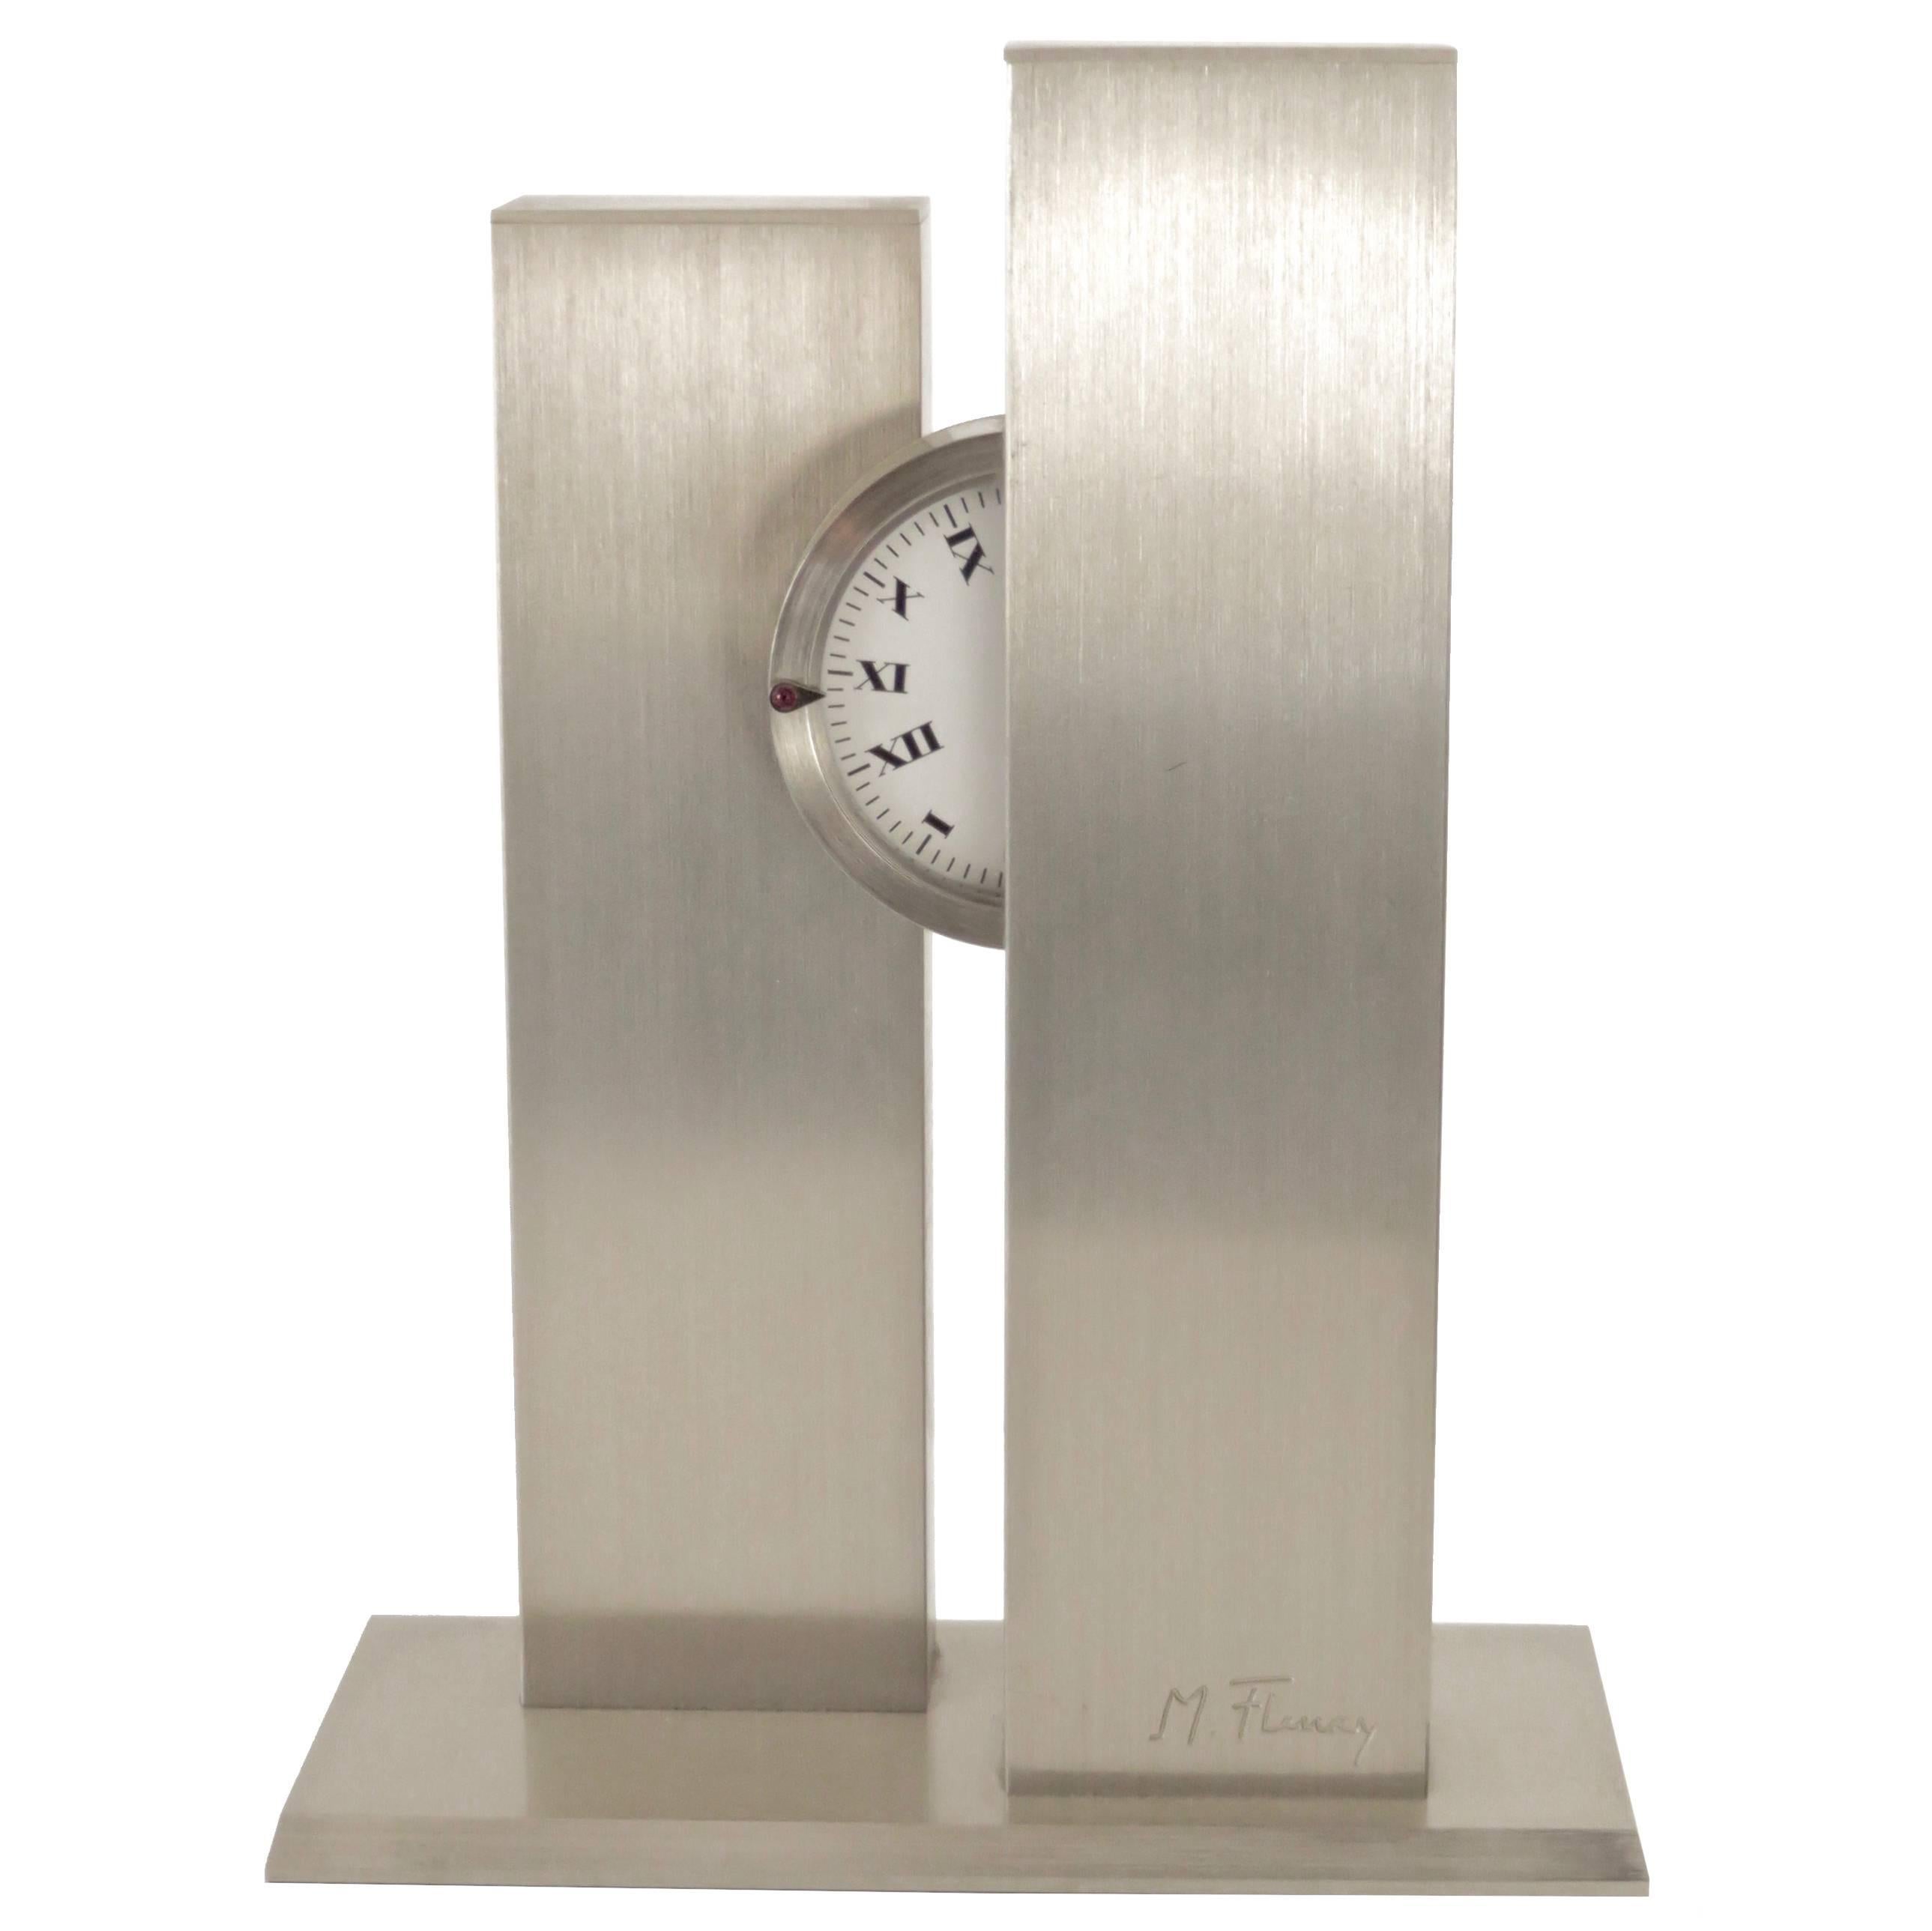 French Sculptural Stainless Steel Clock by Michel Fleury, circa 1970s For Sale